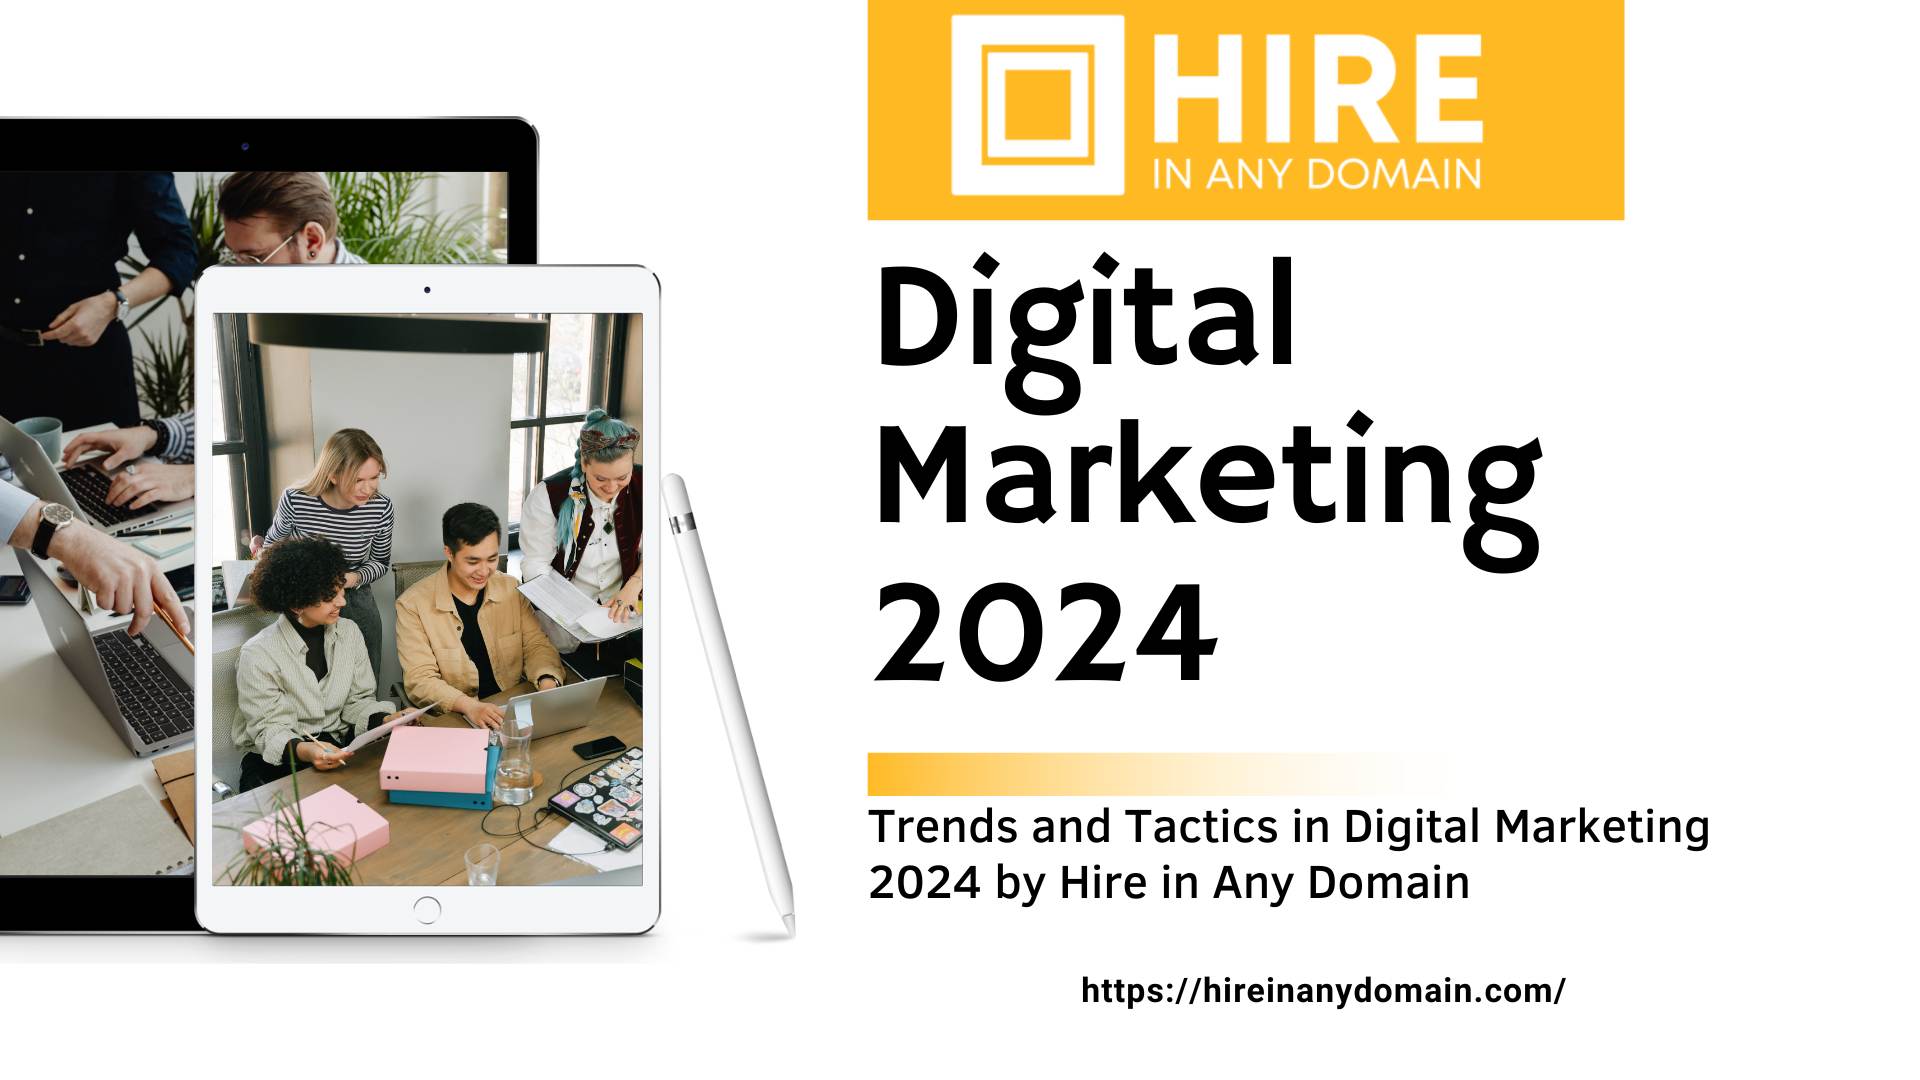 Trends and Tactics in Digital Marketing 2024